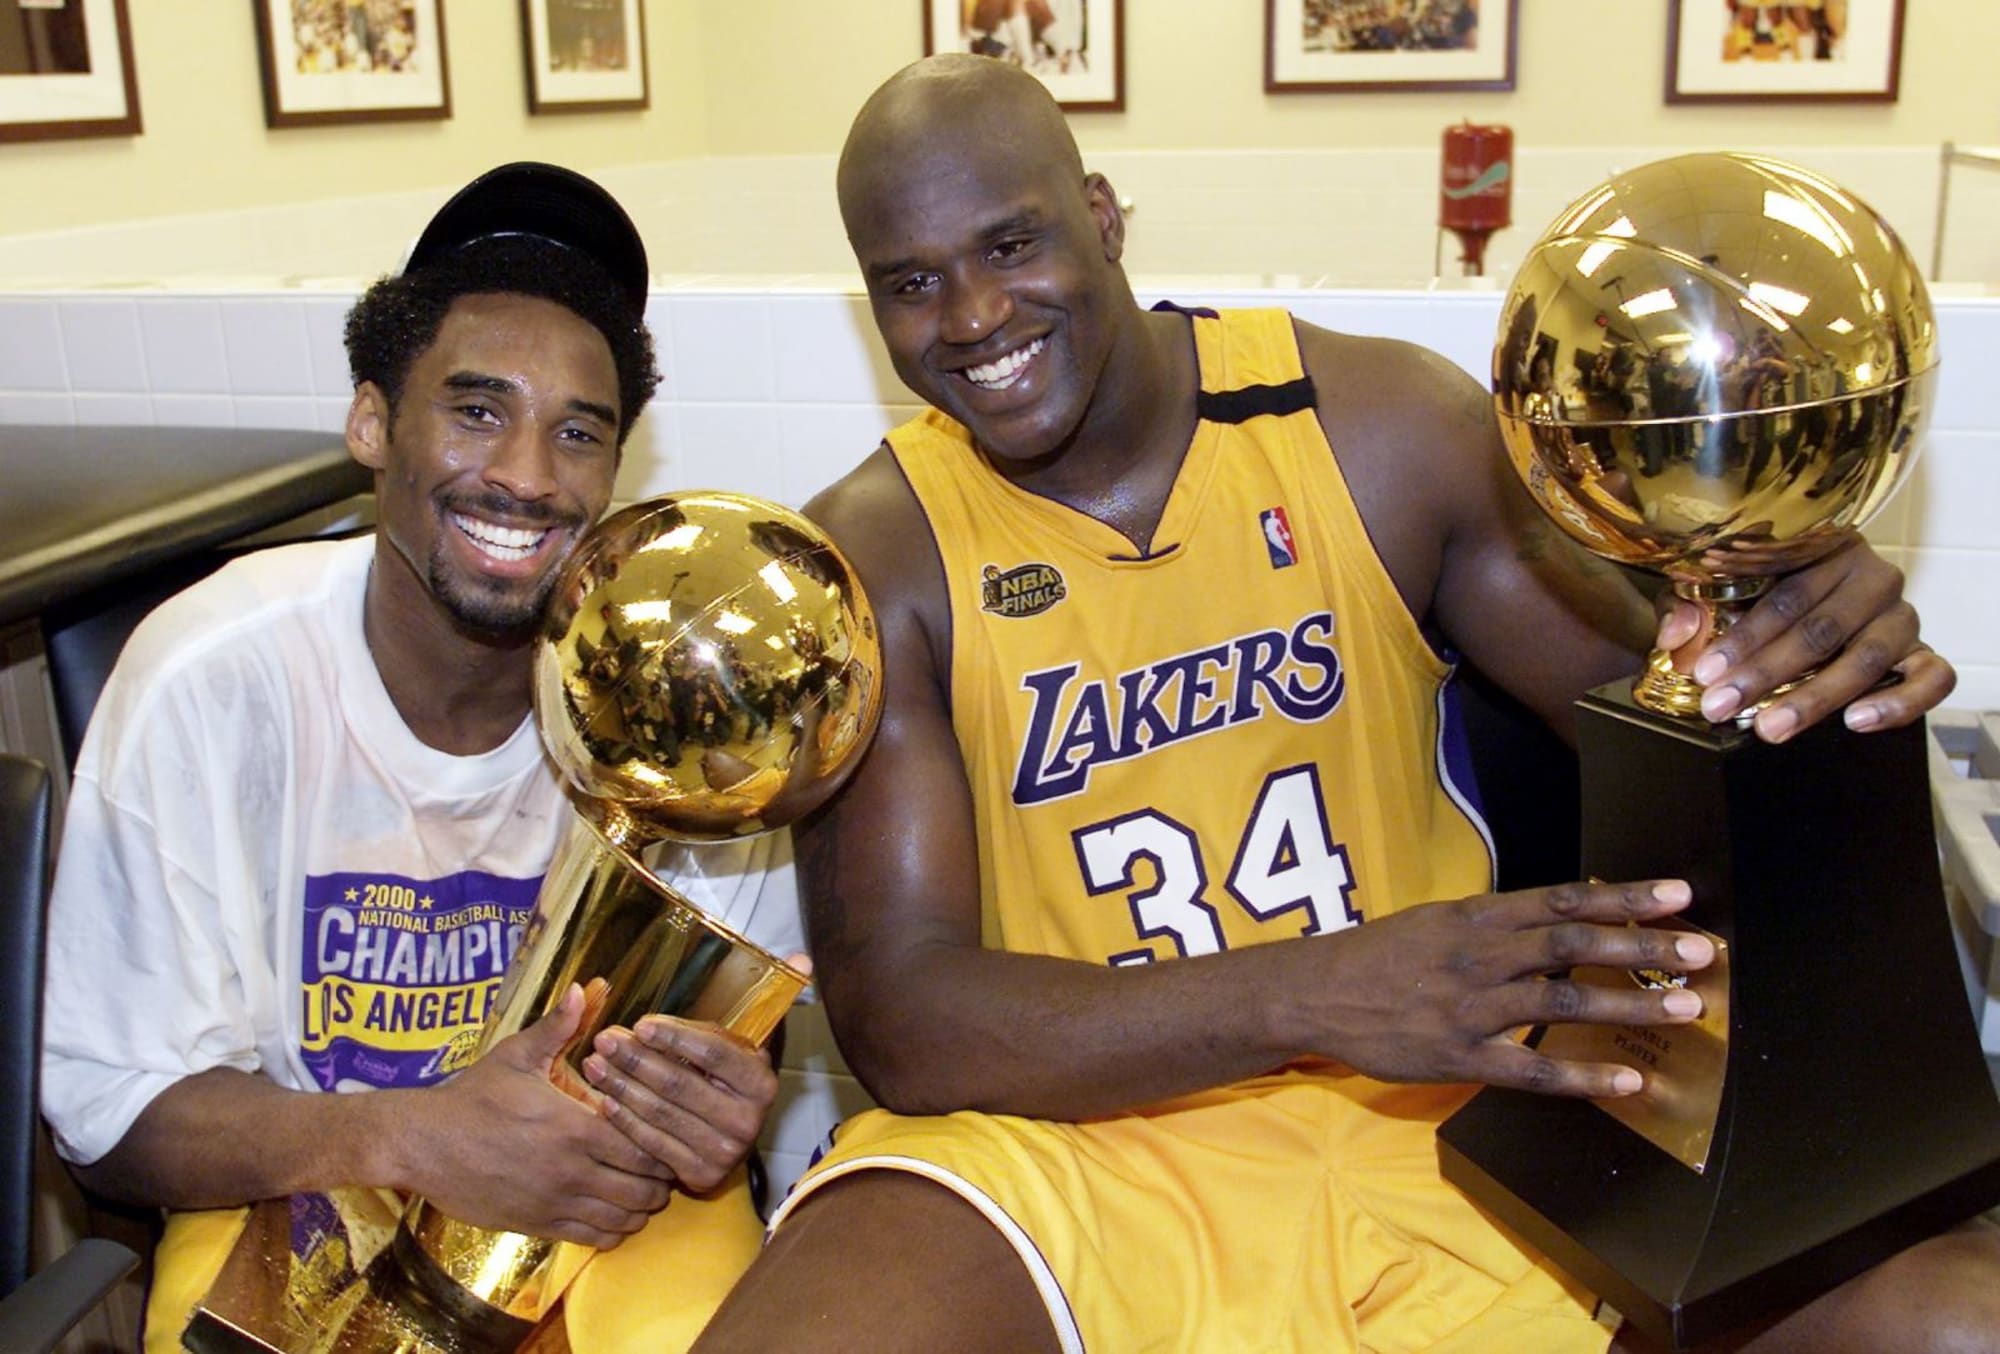 Lakers' triangle of Kobe, Shaq and Phil came together on the court